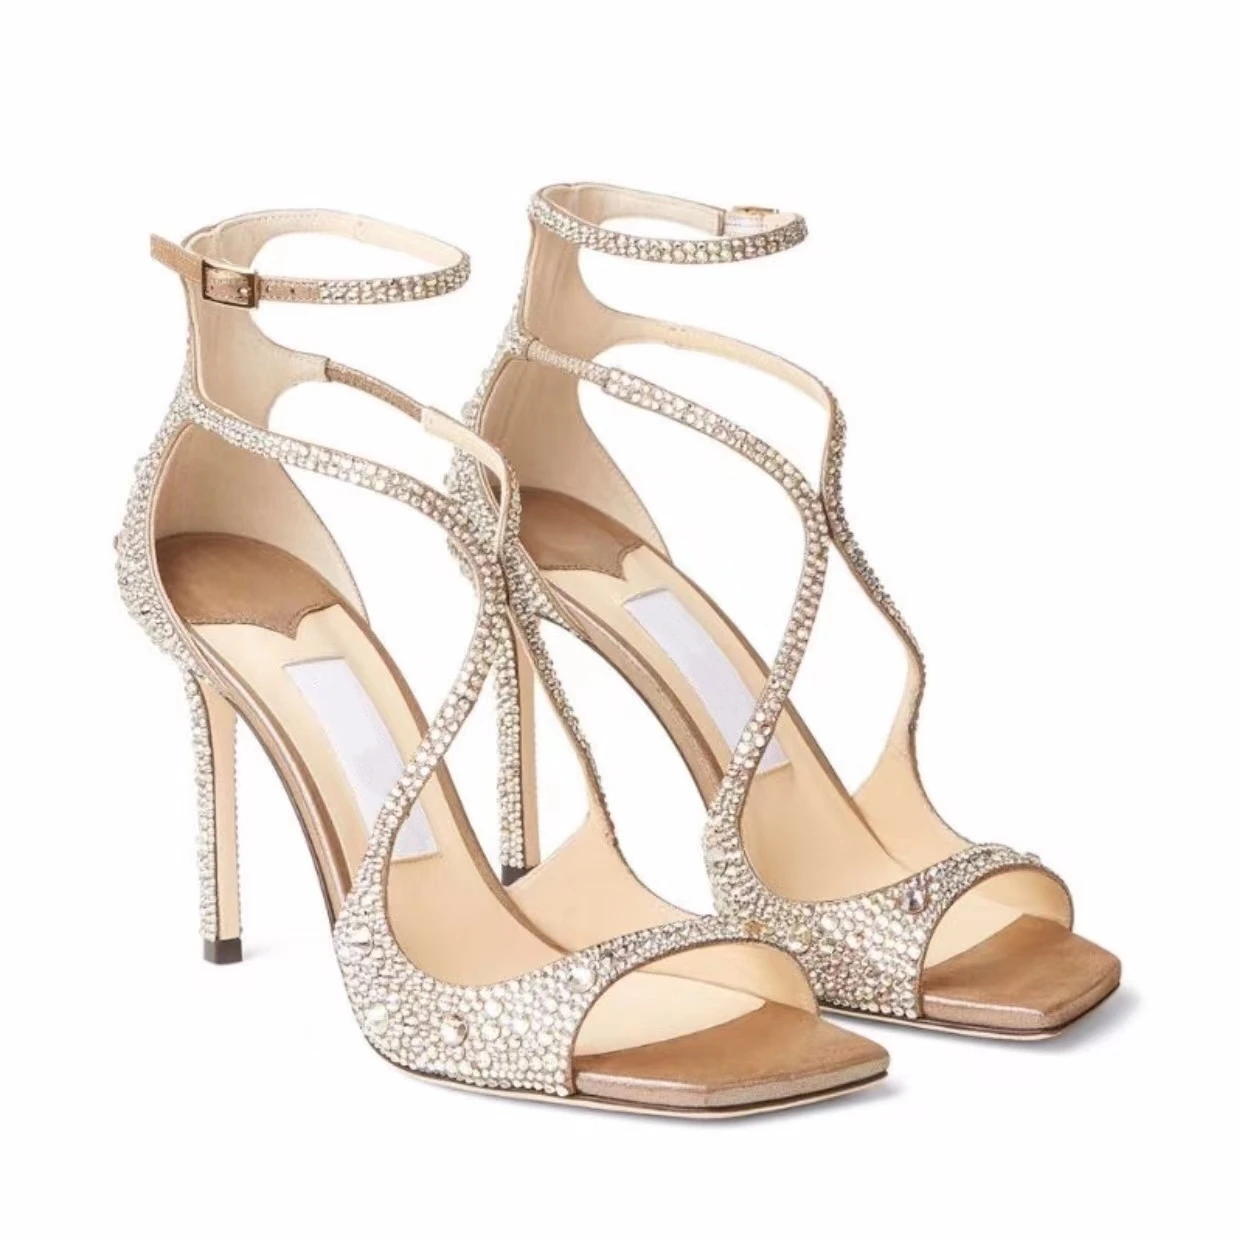 

fashion Azia Square-Toe Sandals SILVER HEELED metallic leather ankle distinctive cut-outs open toe buckle ankle strap high heels